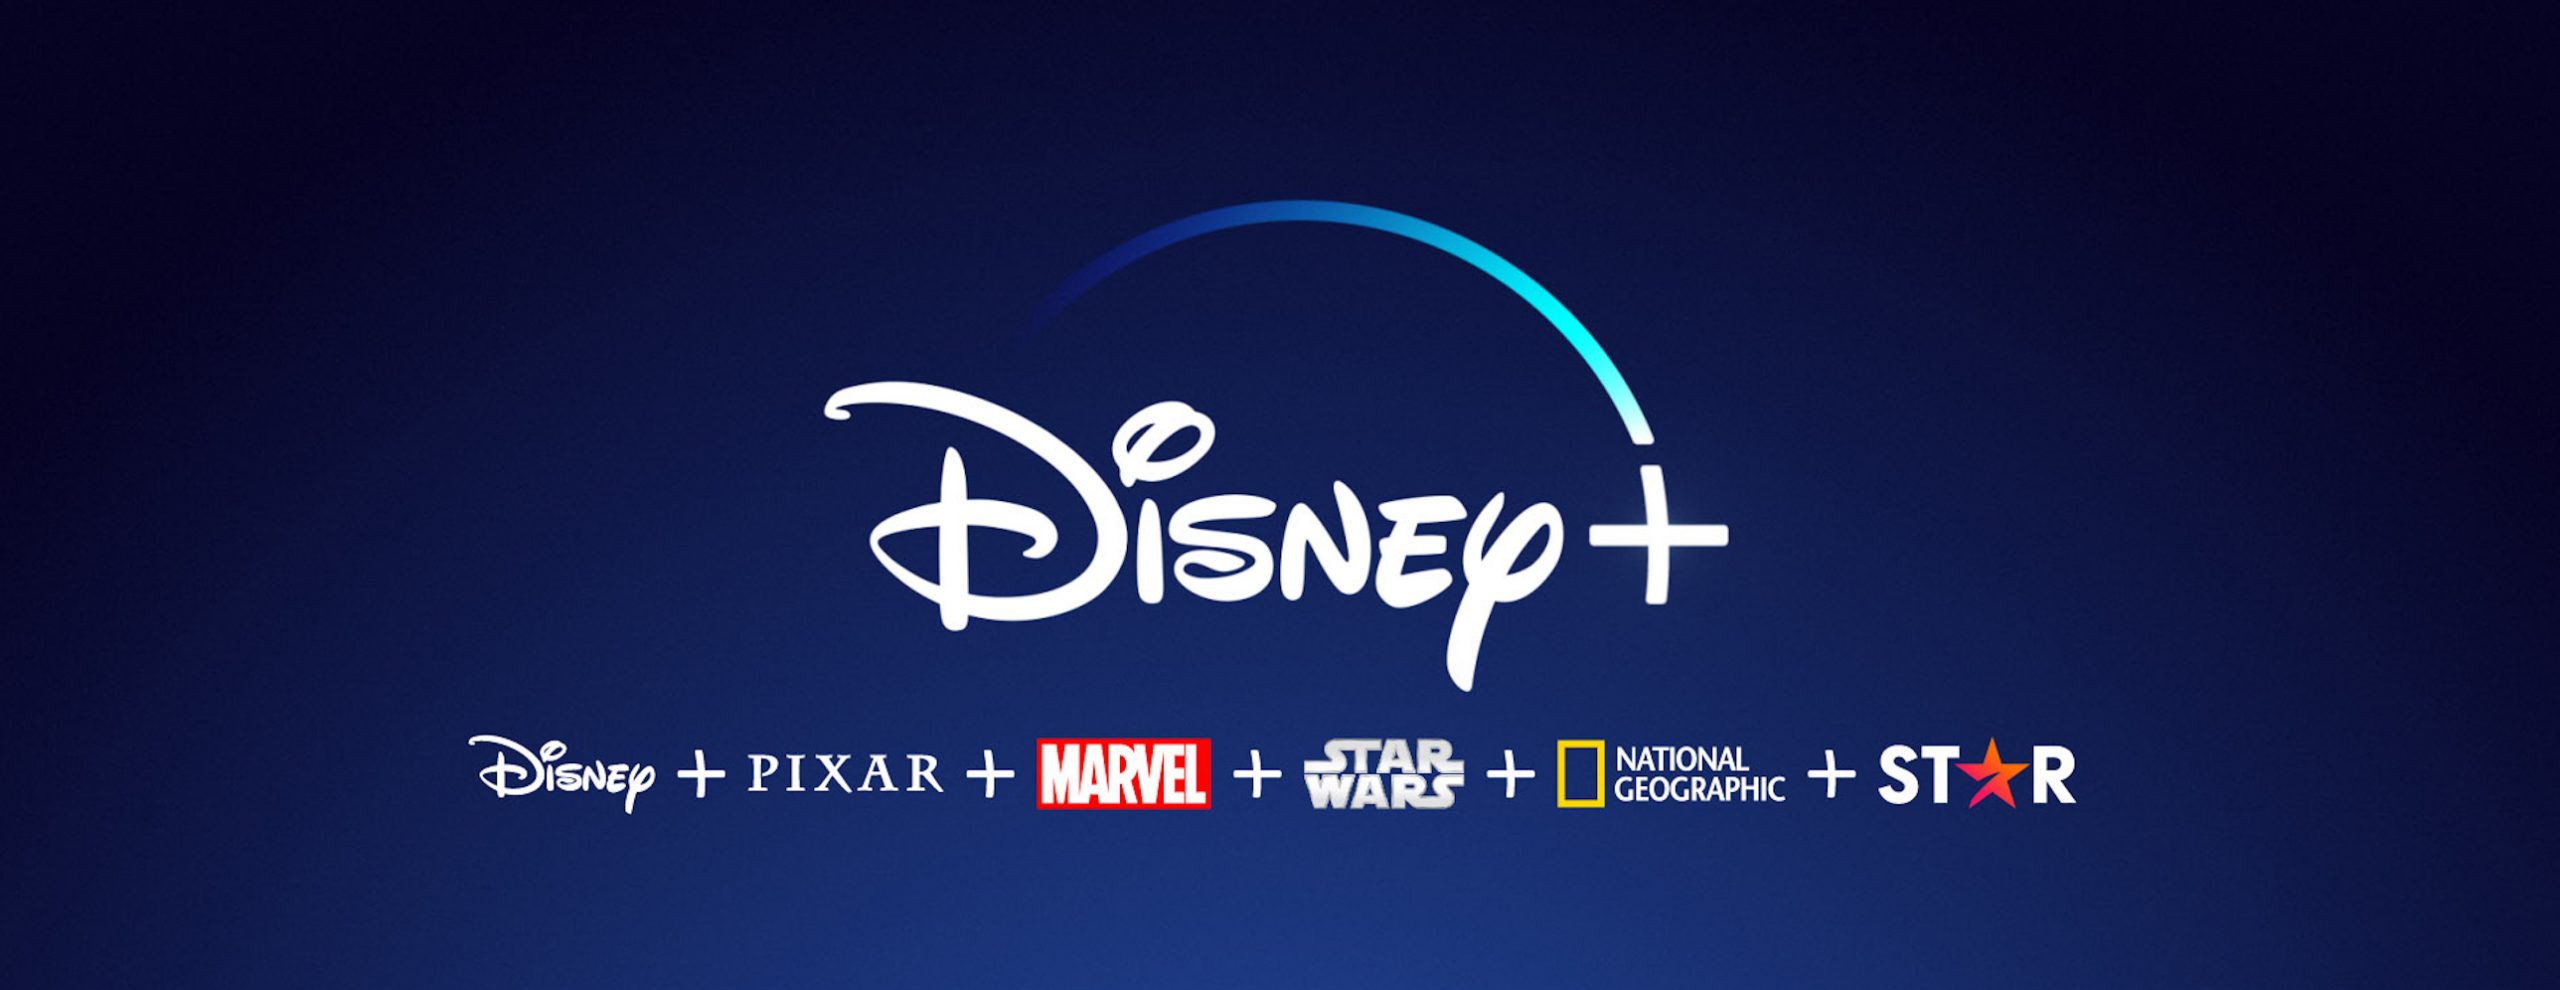 Disney Will Launch In Singapore On 23 February 21 Here Are All The Exclusive Highlights